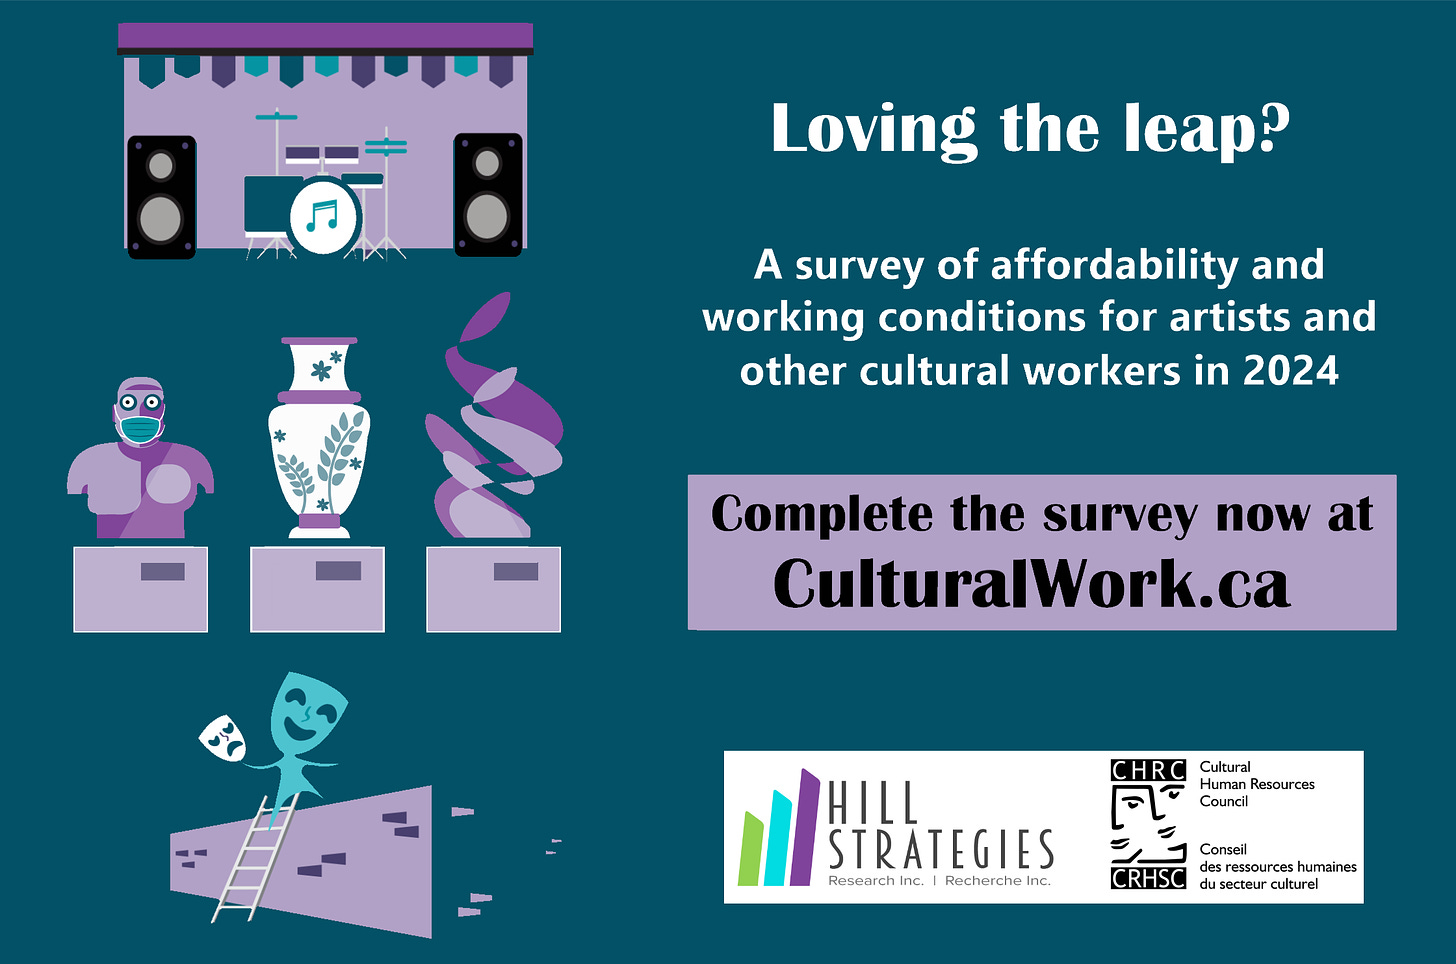 Promotional graphic for Loving the leap: A survey of affordability and working conditions for artists and other cultural workers in 2024. Complete the survey now at http://culturalwork.ca. From Hill Strategies Research and the Cultural Human Resources Council.